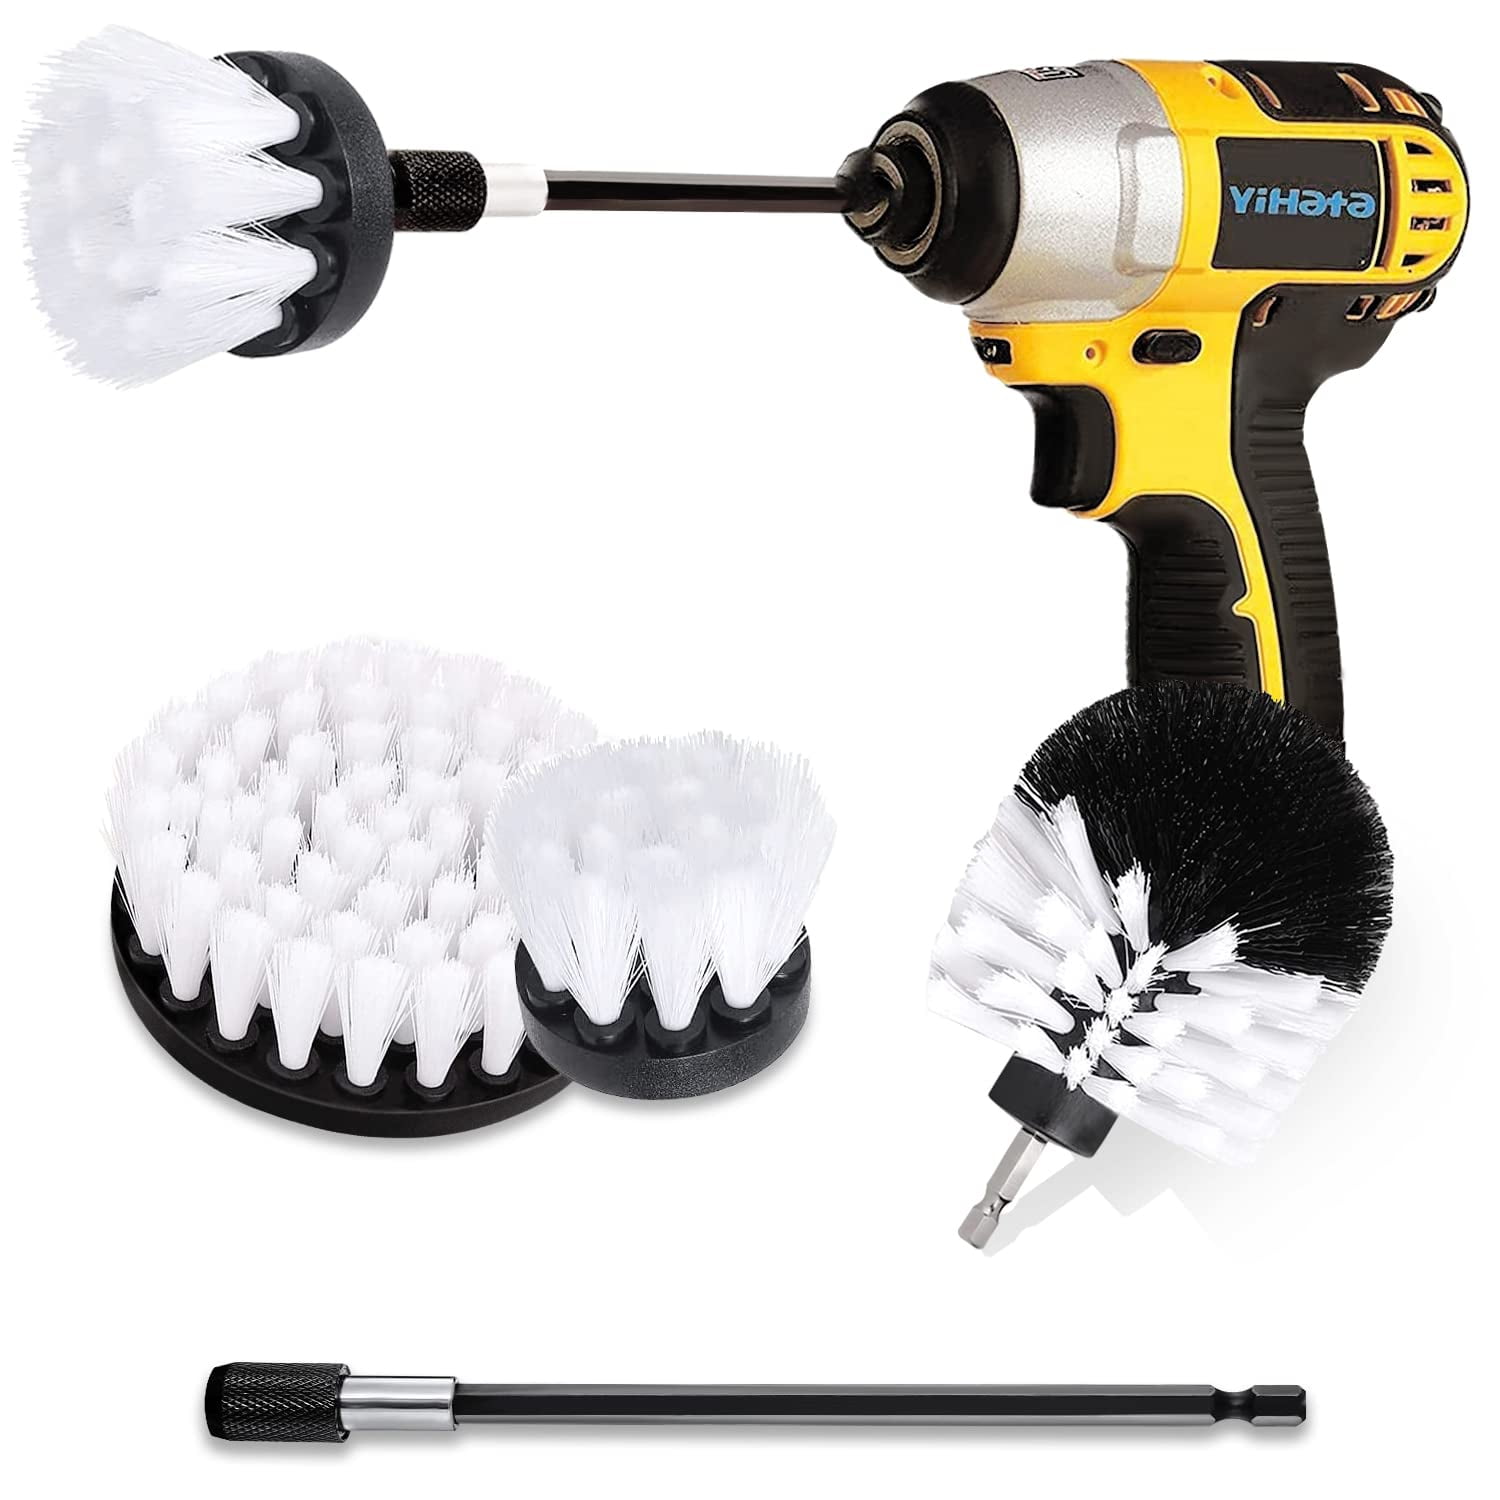 Drill Brush - Cleaning Supplies - Rotary Brush Kit w/Extension - Kitchen Accessories – Pots and Pans - Cast Iron Skillet - Power Dish Washing